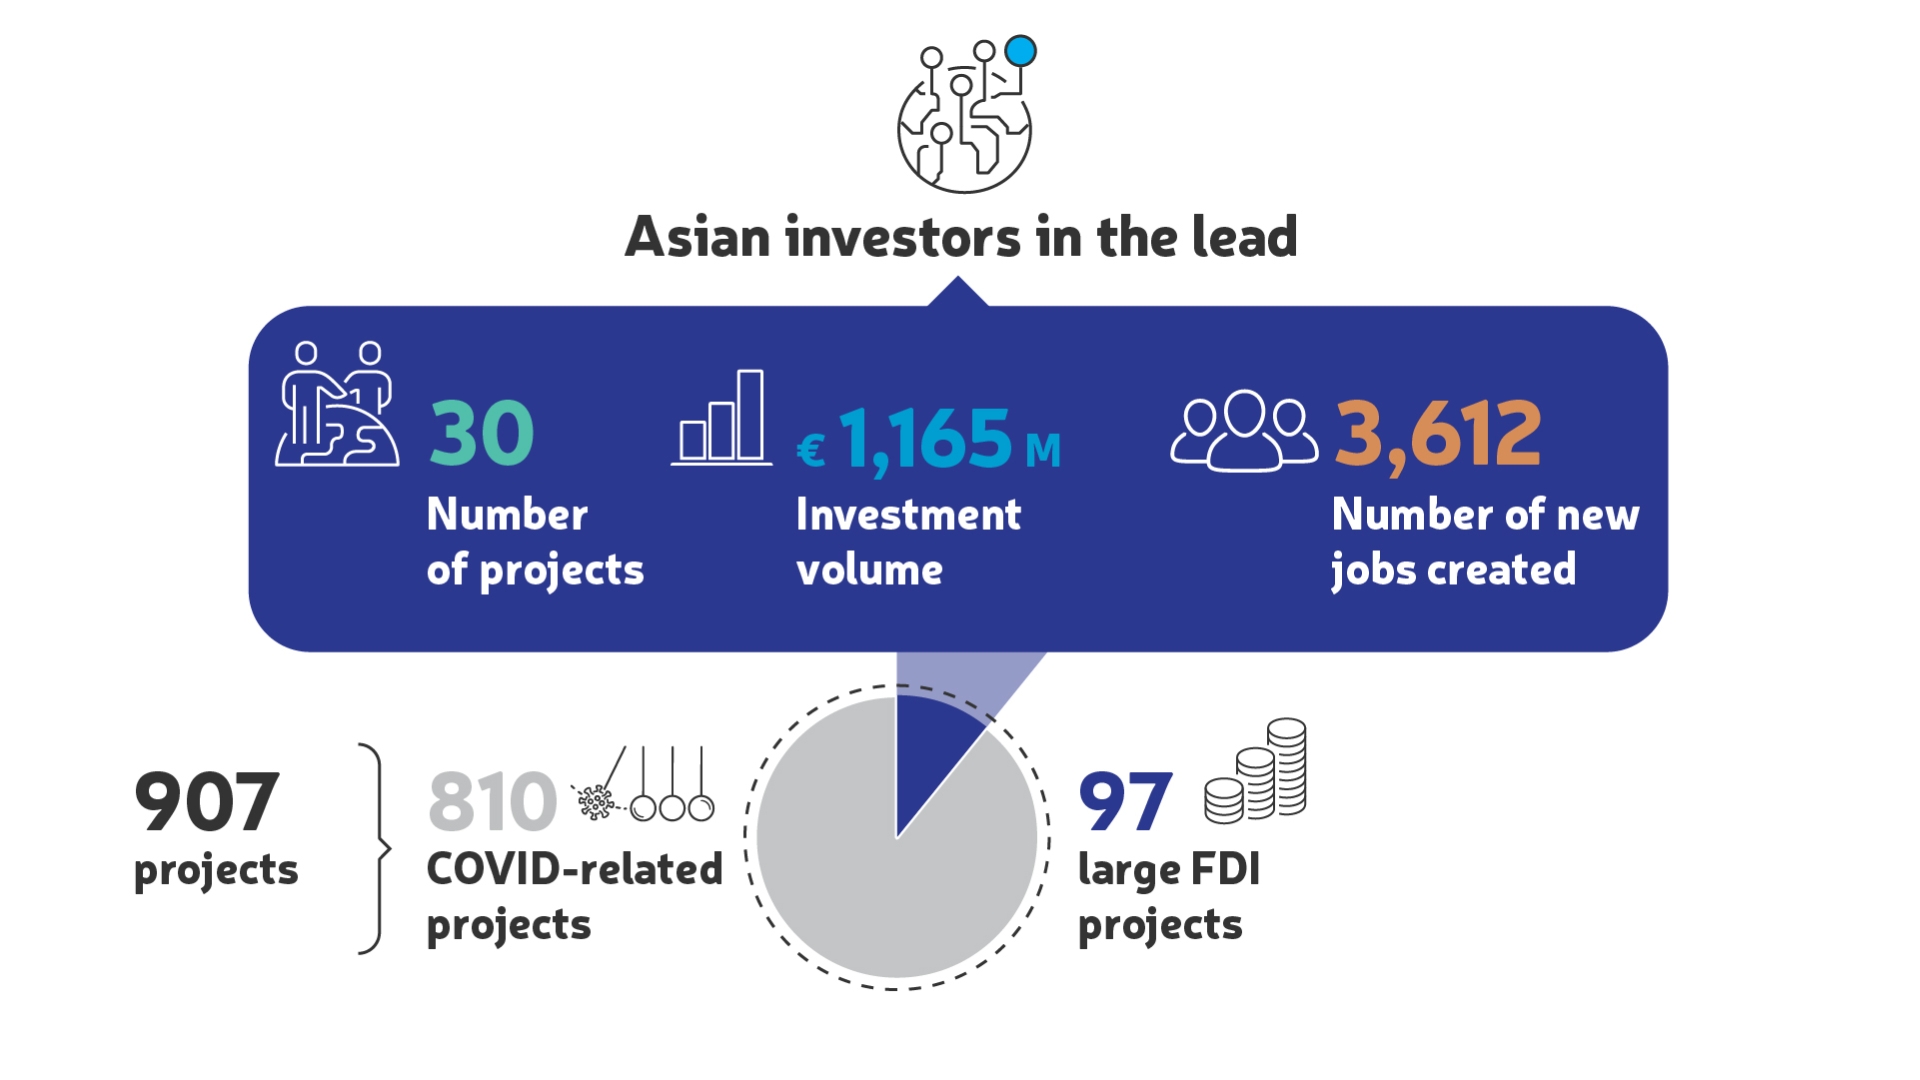 Asian investments are continuing to expand